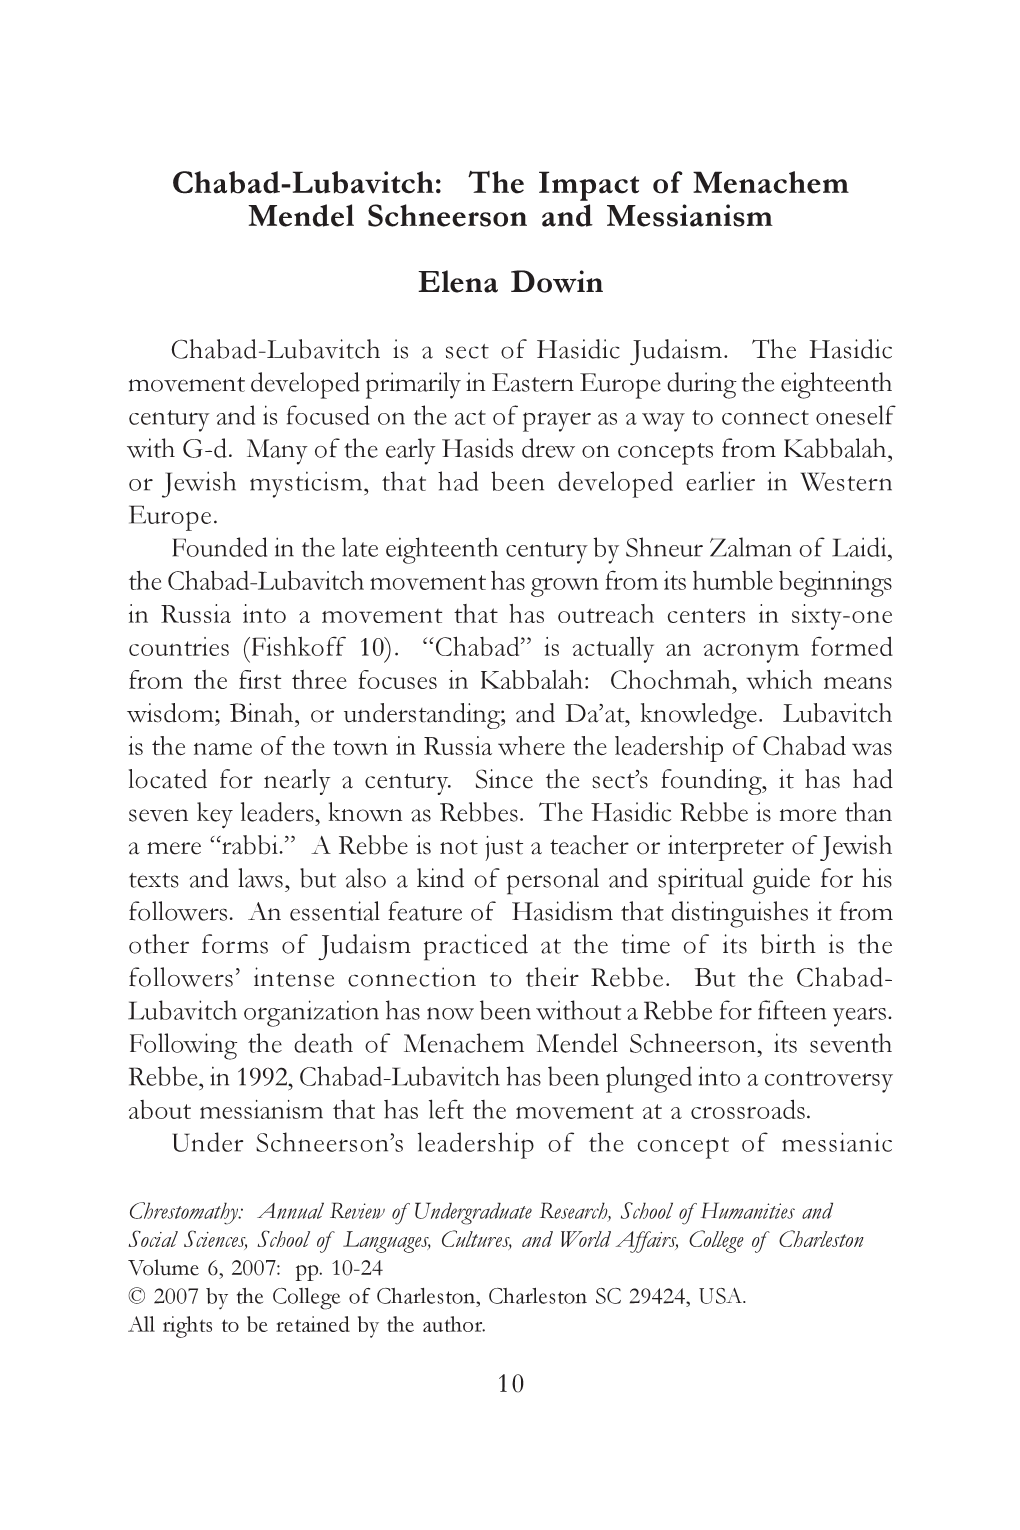 Chabad-Lubavitch: the Impact of Menachem Mendel Schneerson and Messianism Elena Dowin